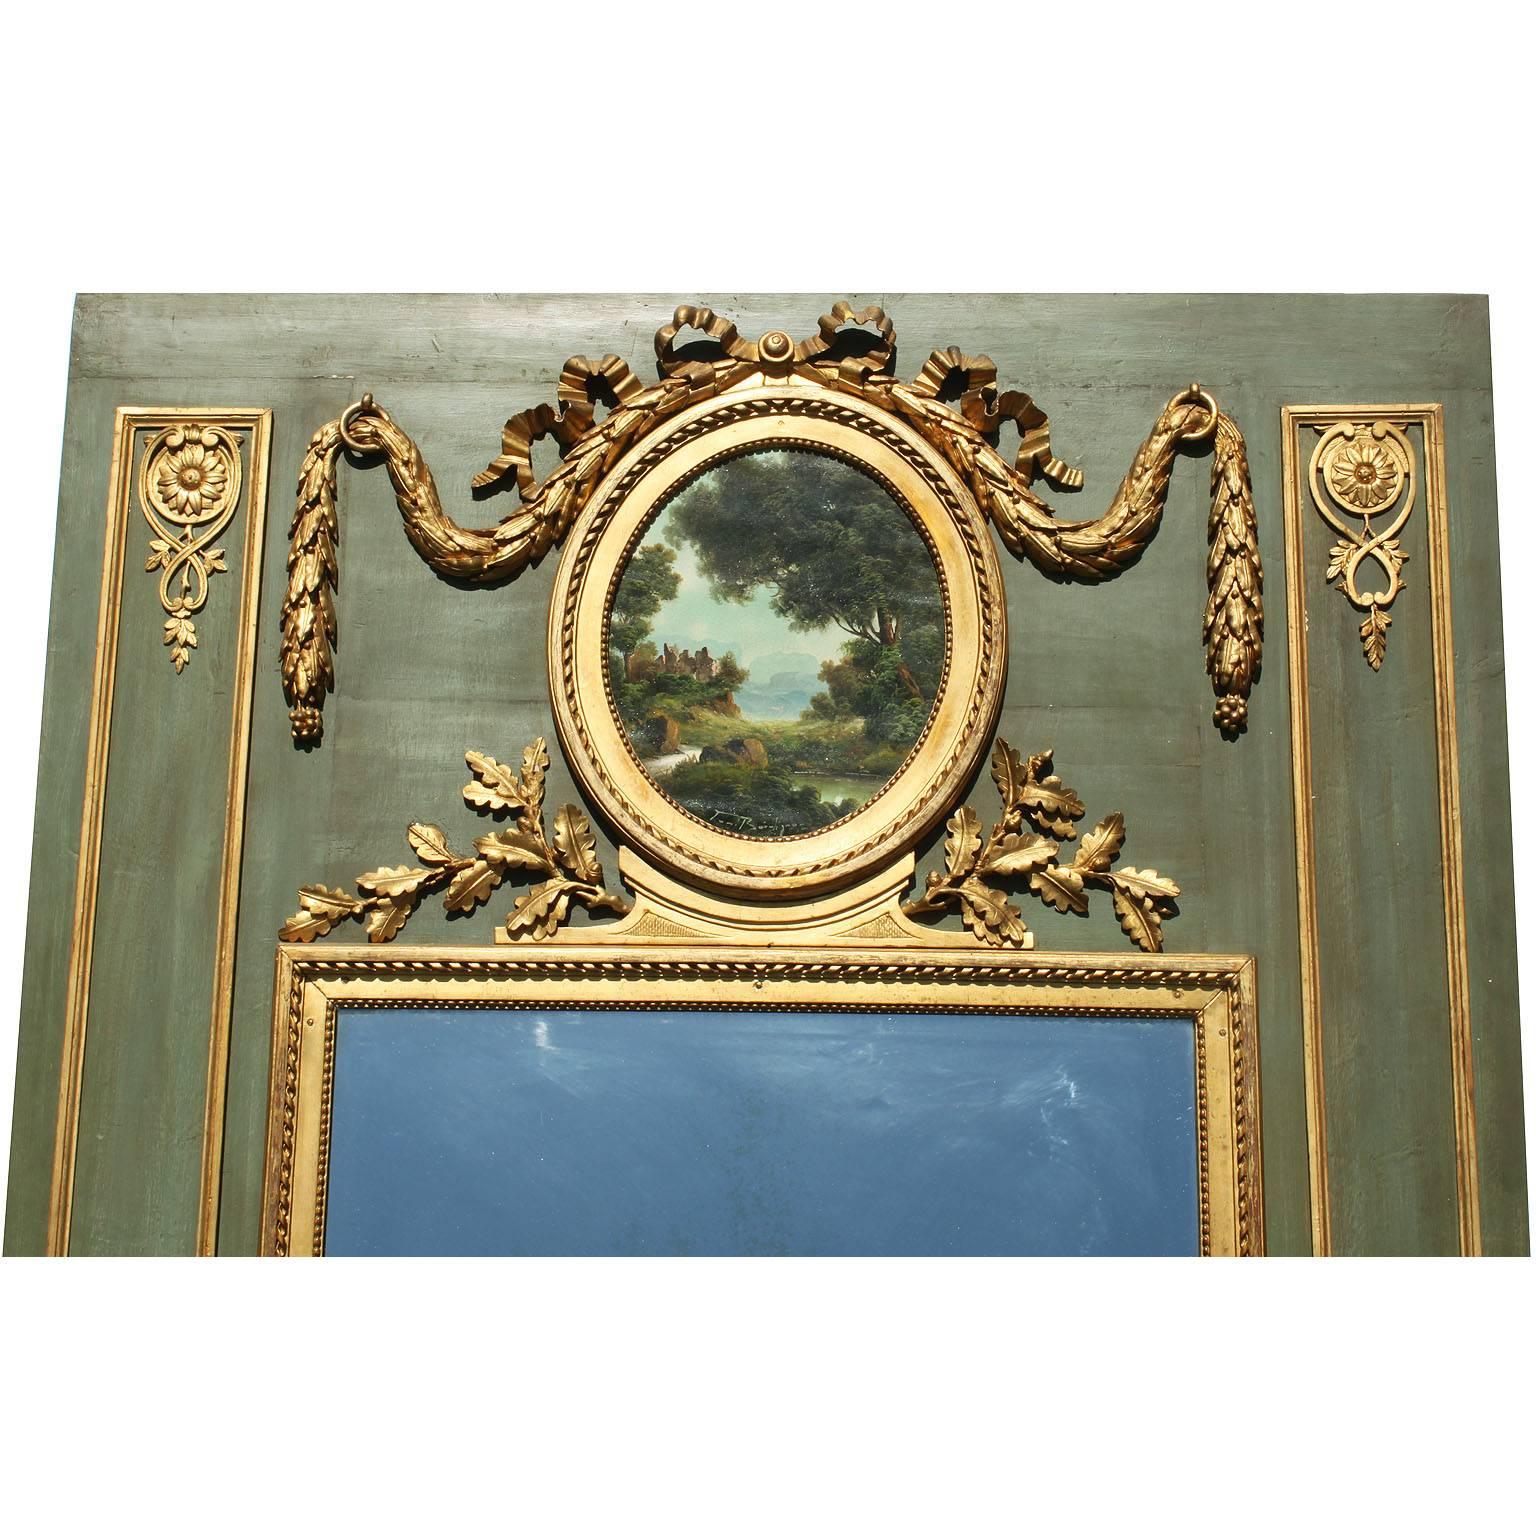 A fine French 19th century Louis XVI style green painted and parcel-gilt wood carved trumeau mirror frame. The elongated frame surmounted with giltwood carved wreaths, leaves, urns, shields, bows, ribbons and moldings, centred with an oval oil on